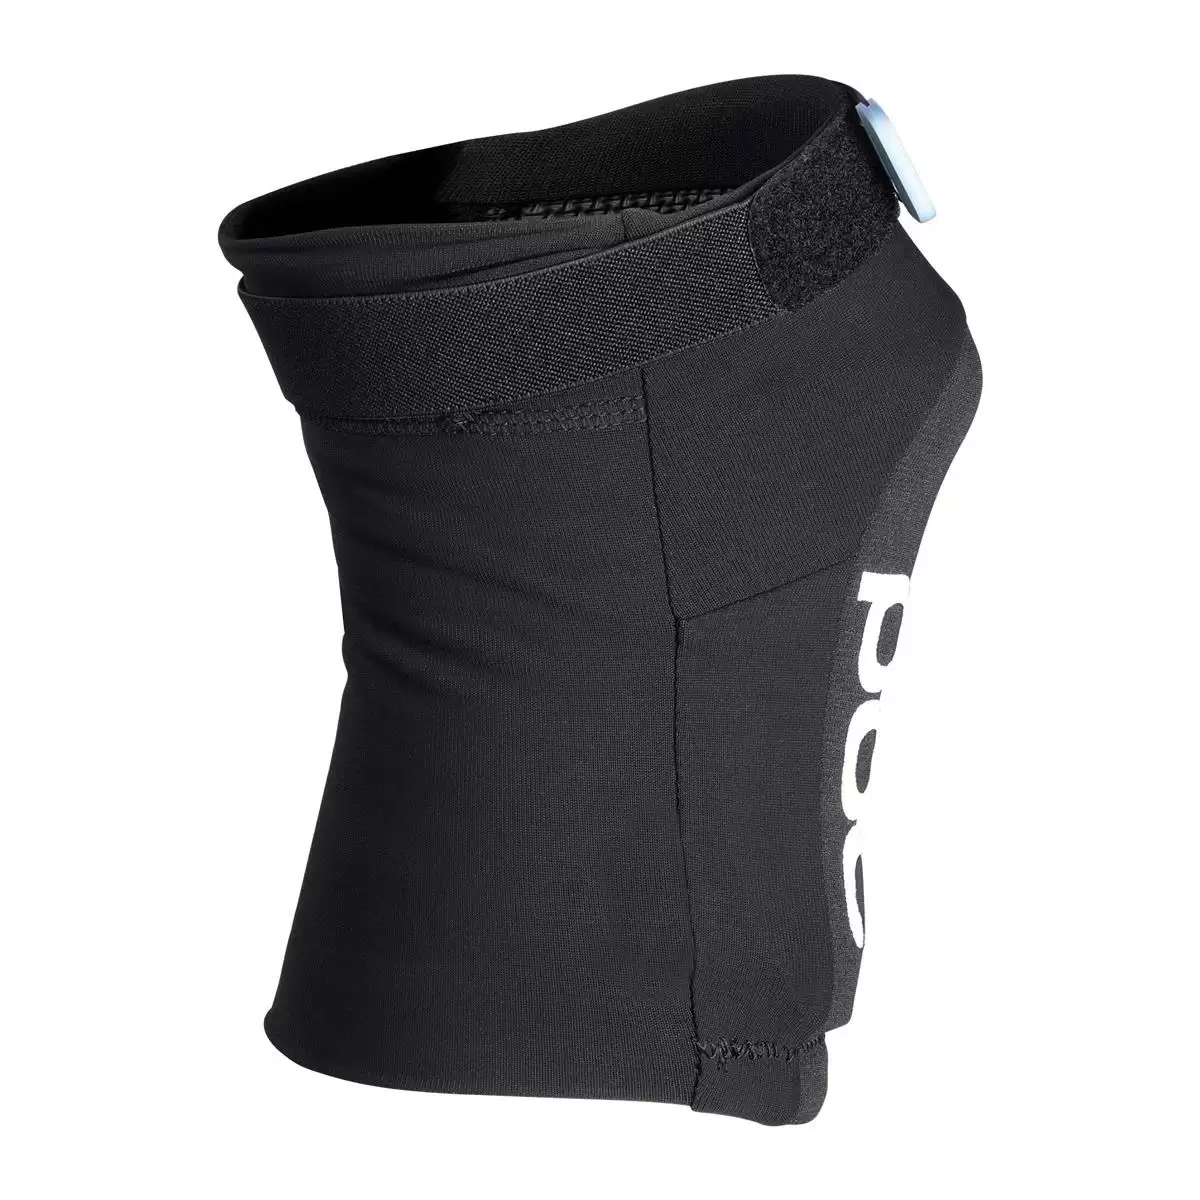 Joint VPD Air Knee pads black Size S #2